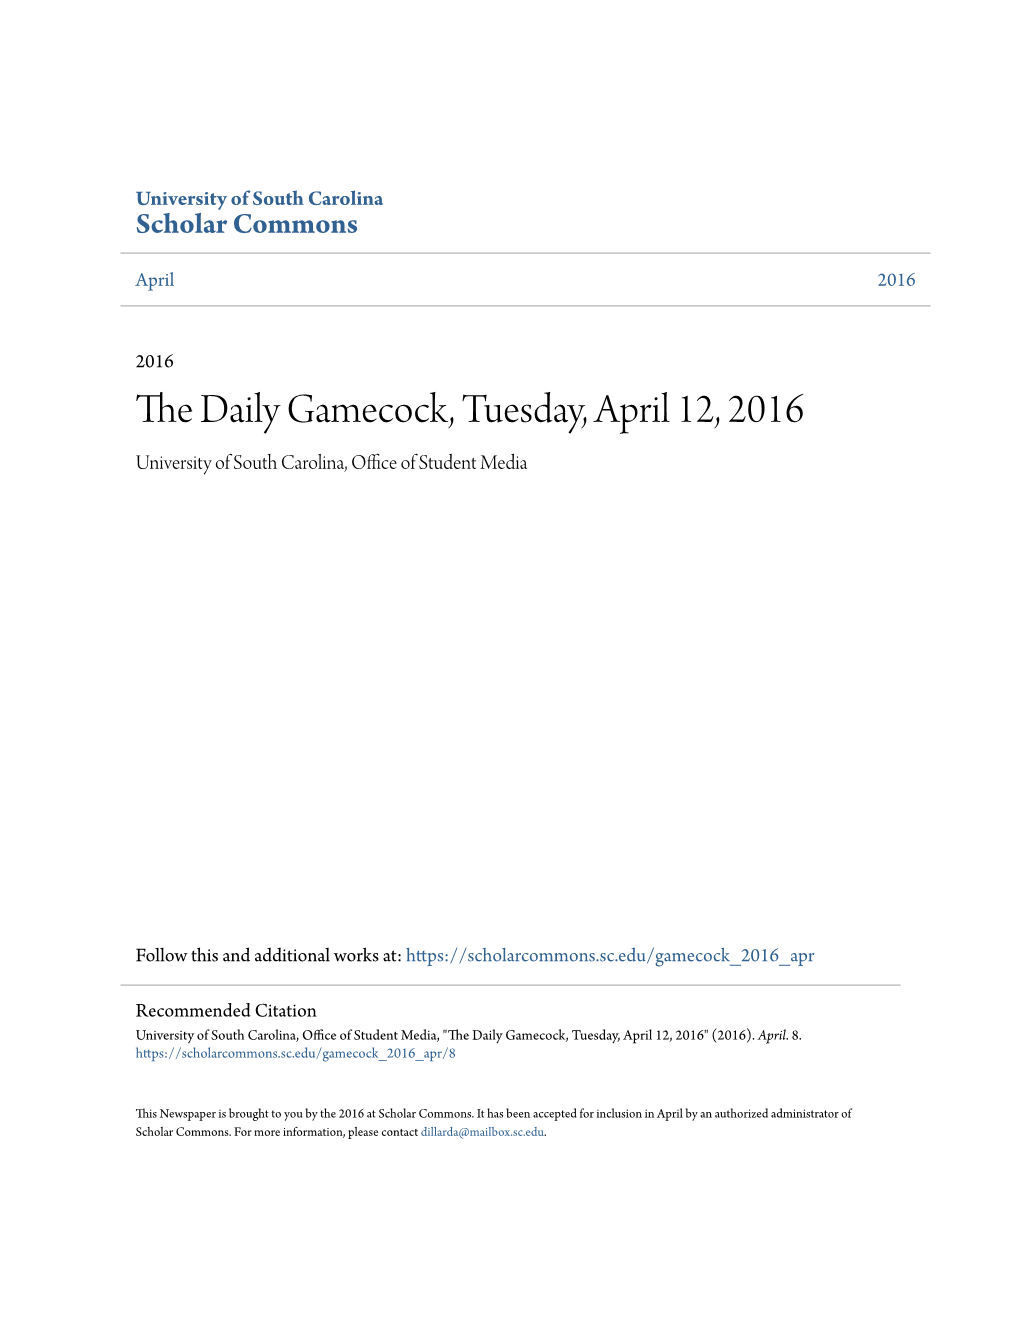 The Daily Gamecock, Tuesday, April 12, 2016